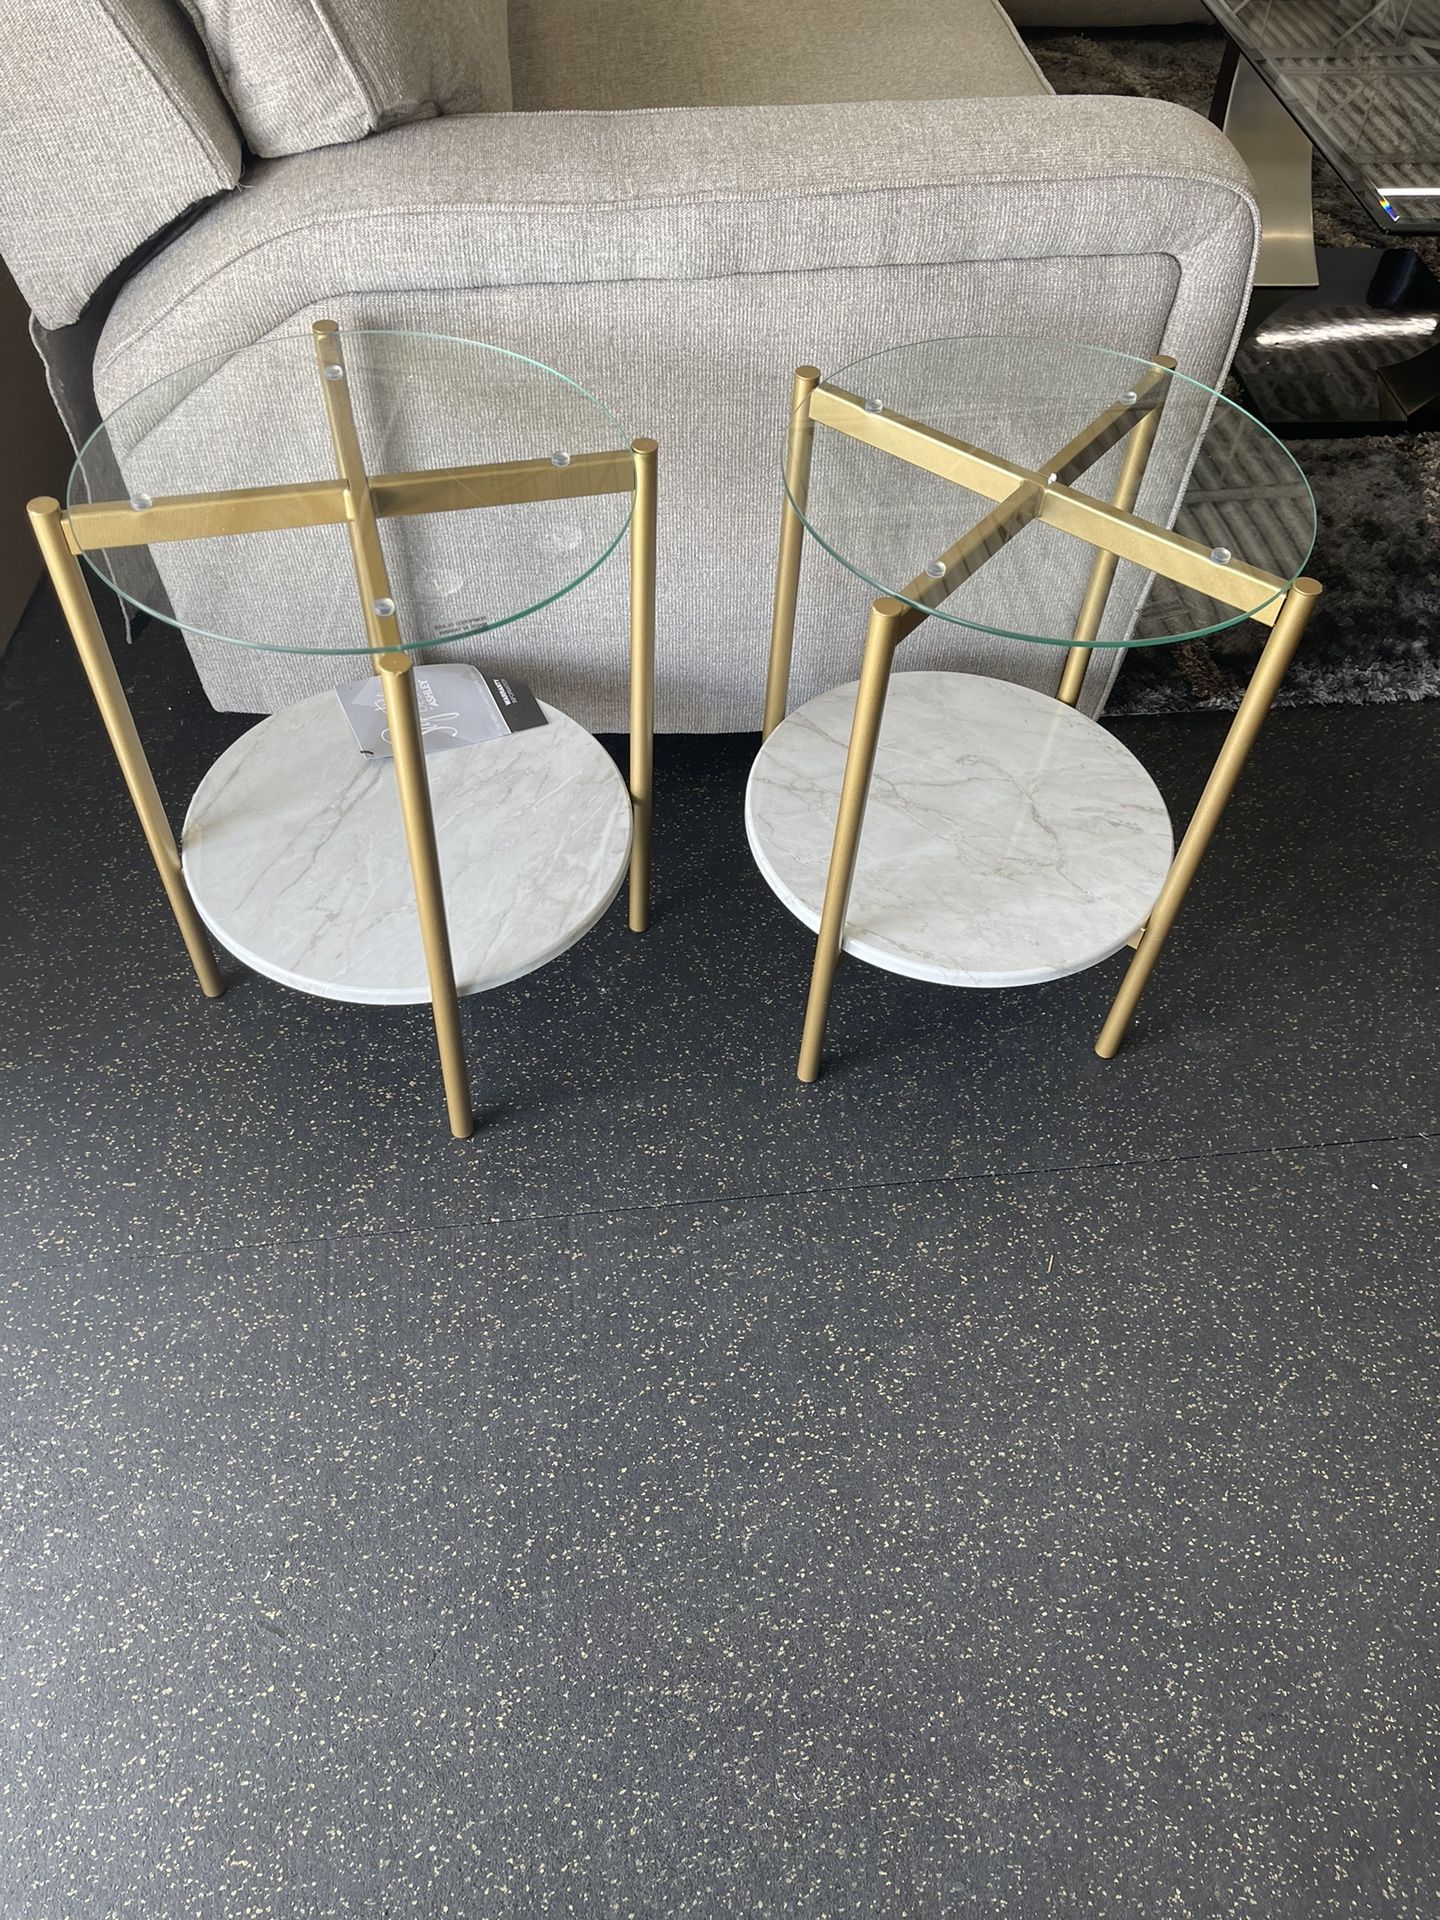 End Table On Clearance $75.00 Each 2 For $150.00